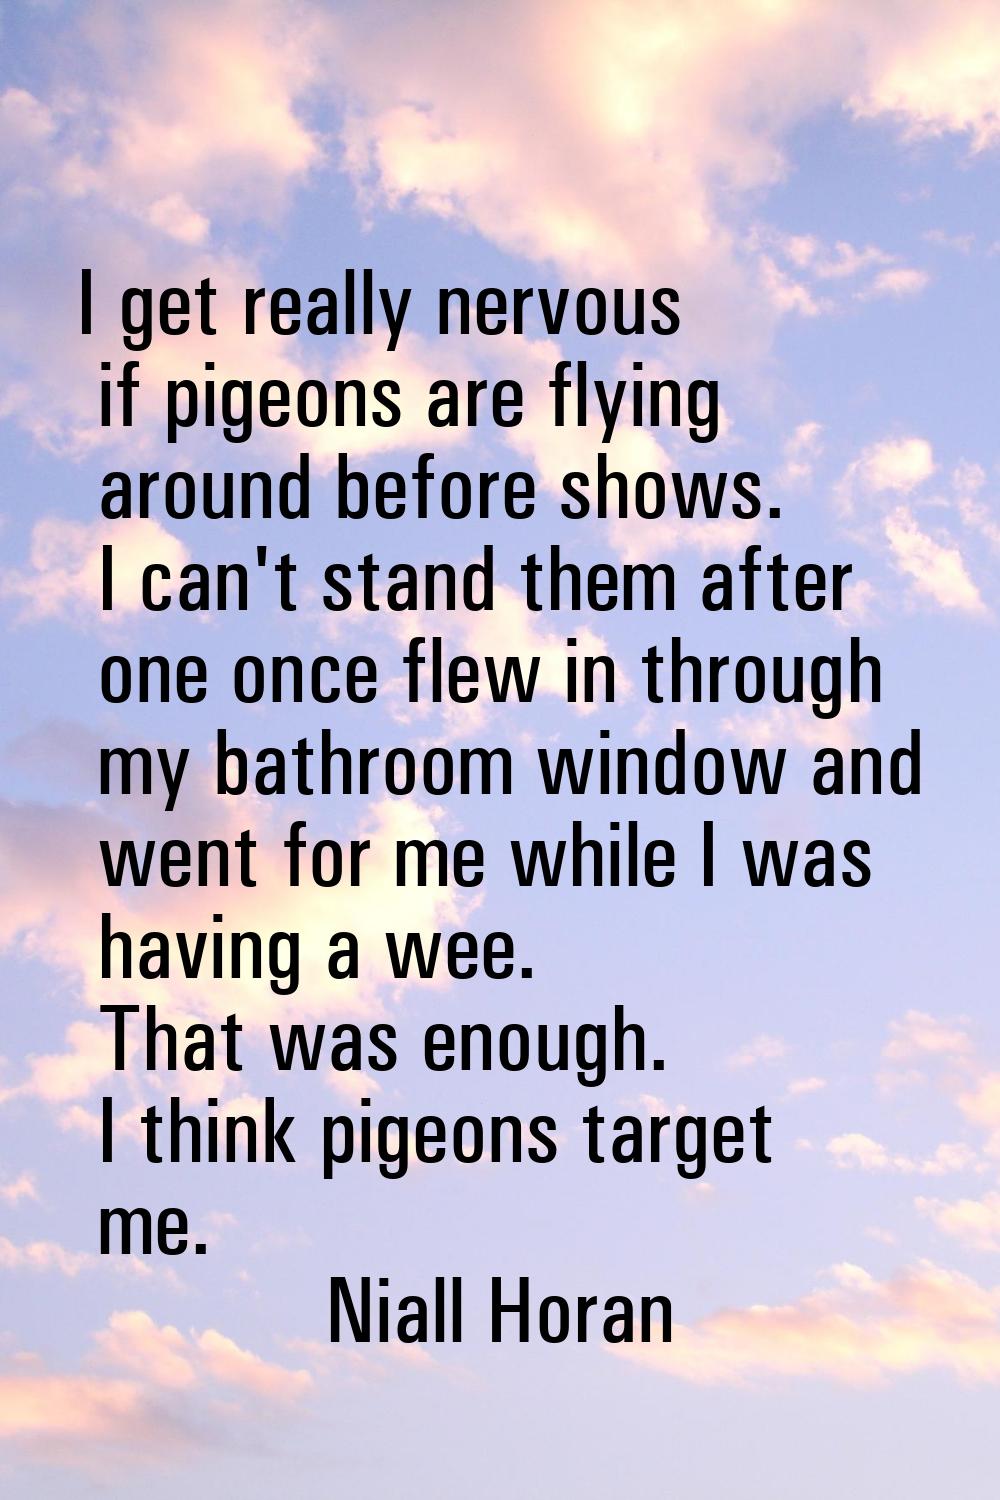 I get really nervous if pigeons are flying around before shows. I can't stand them after one once f